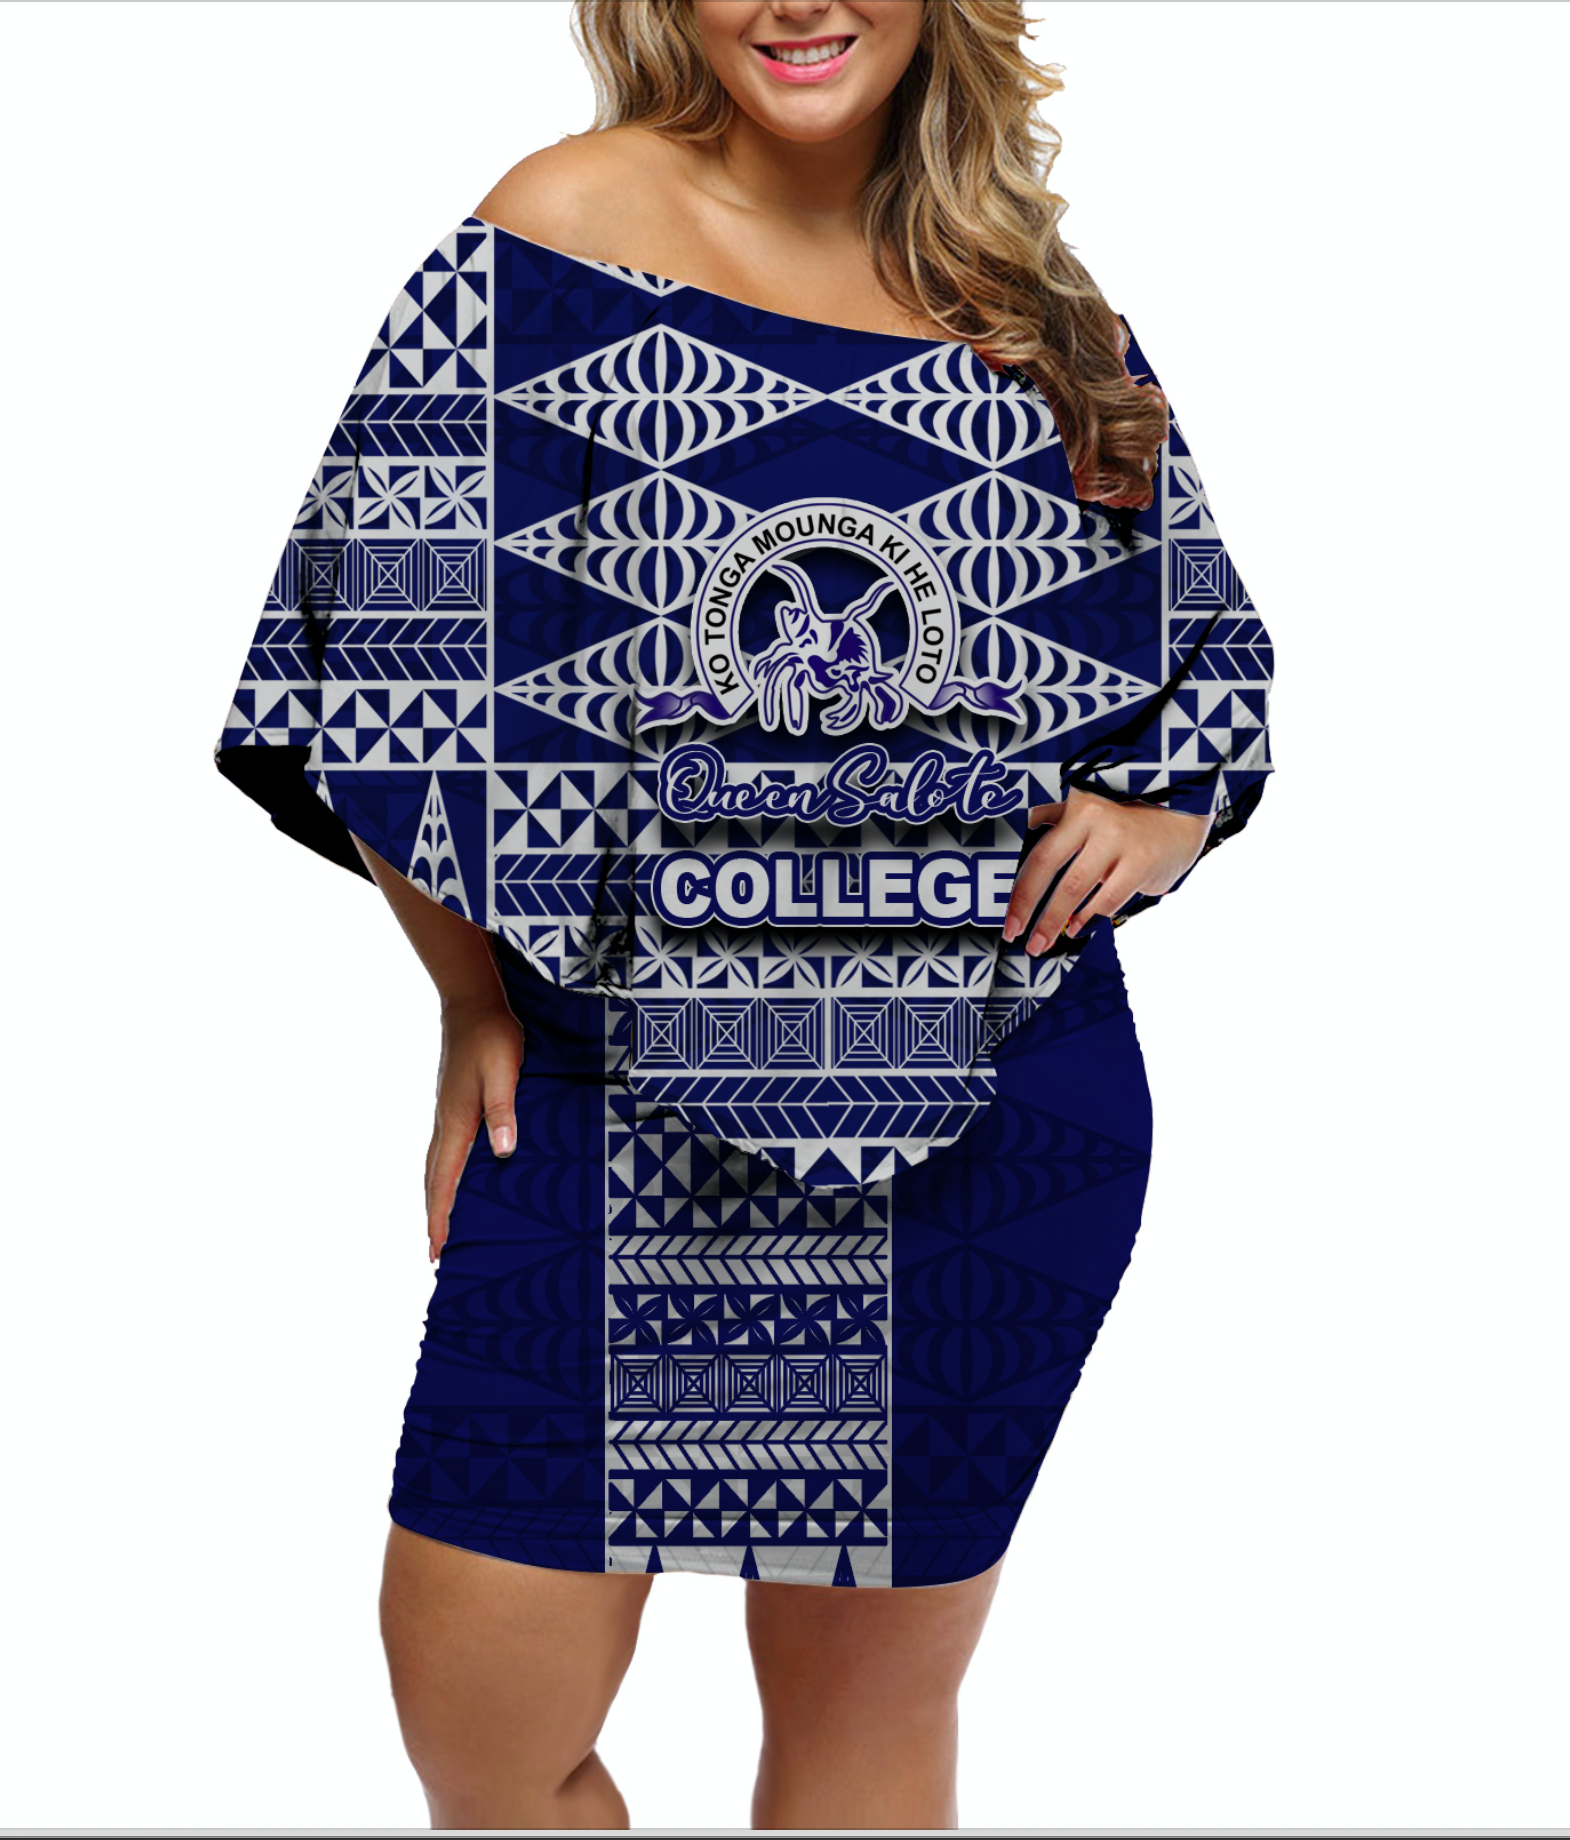 Queen Salote College Off Shoulder Short Dress Tonga Simple Style LT6 Women Blue - Polynesian Pride